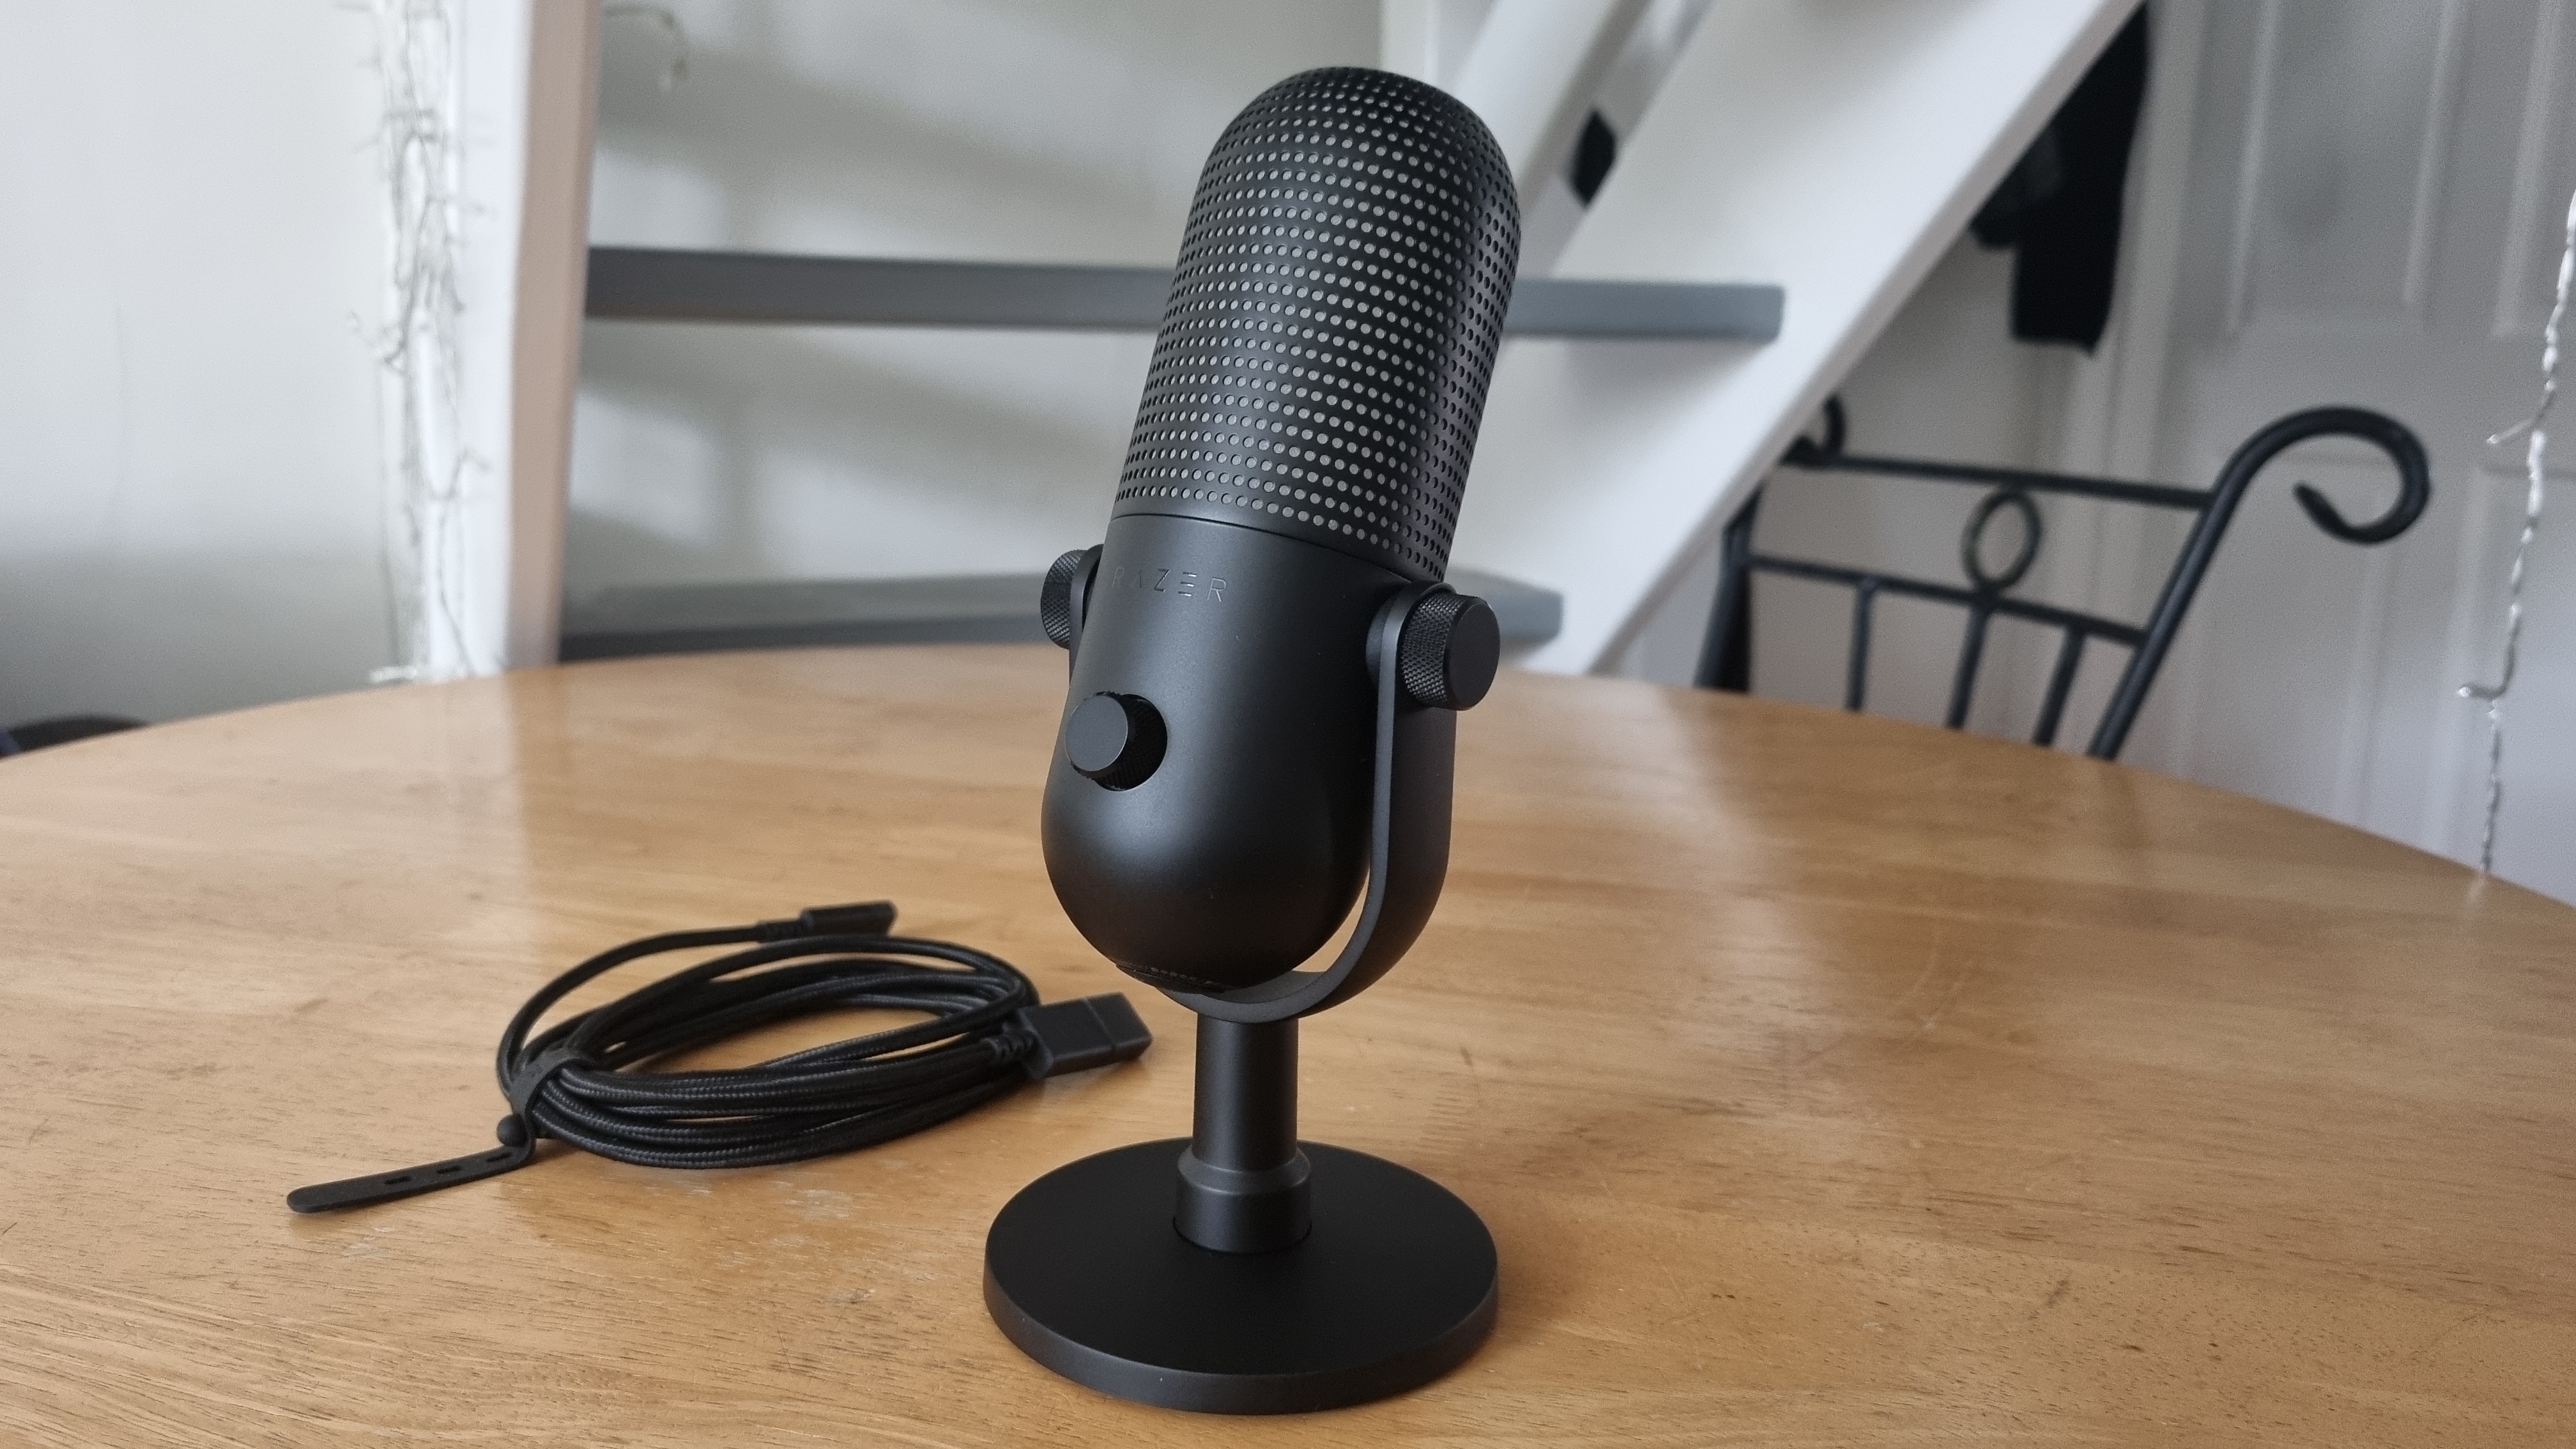 The Razer Seiren V3 Chroma microphone on a desktop, lights off, with the included cable